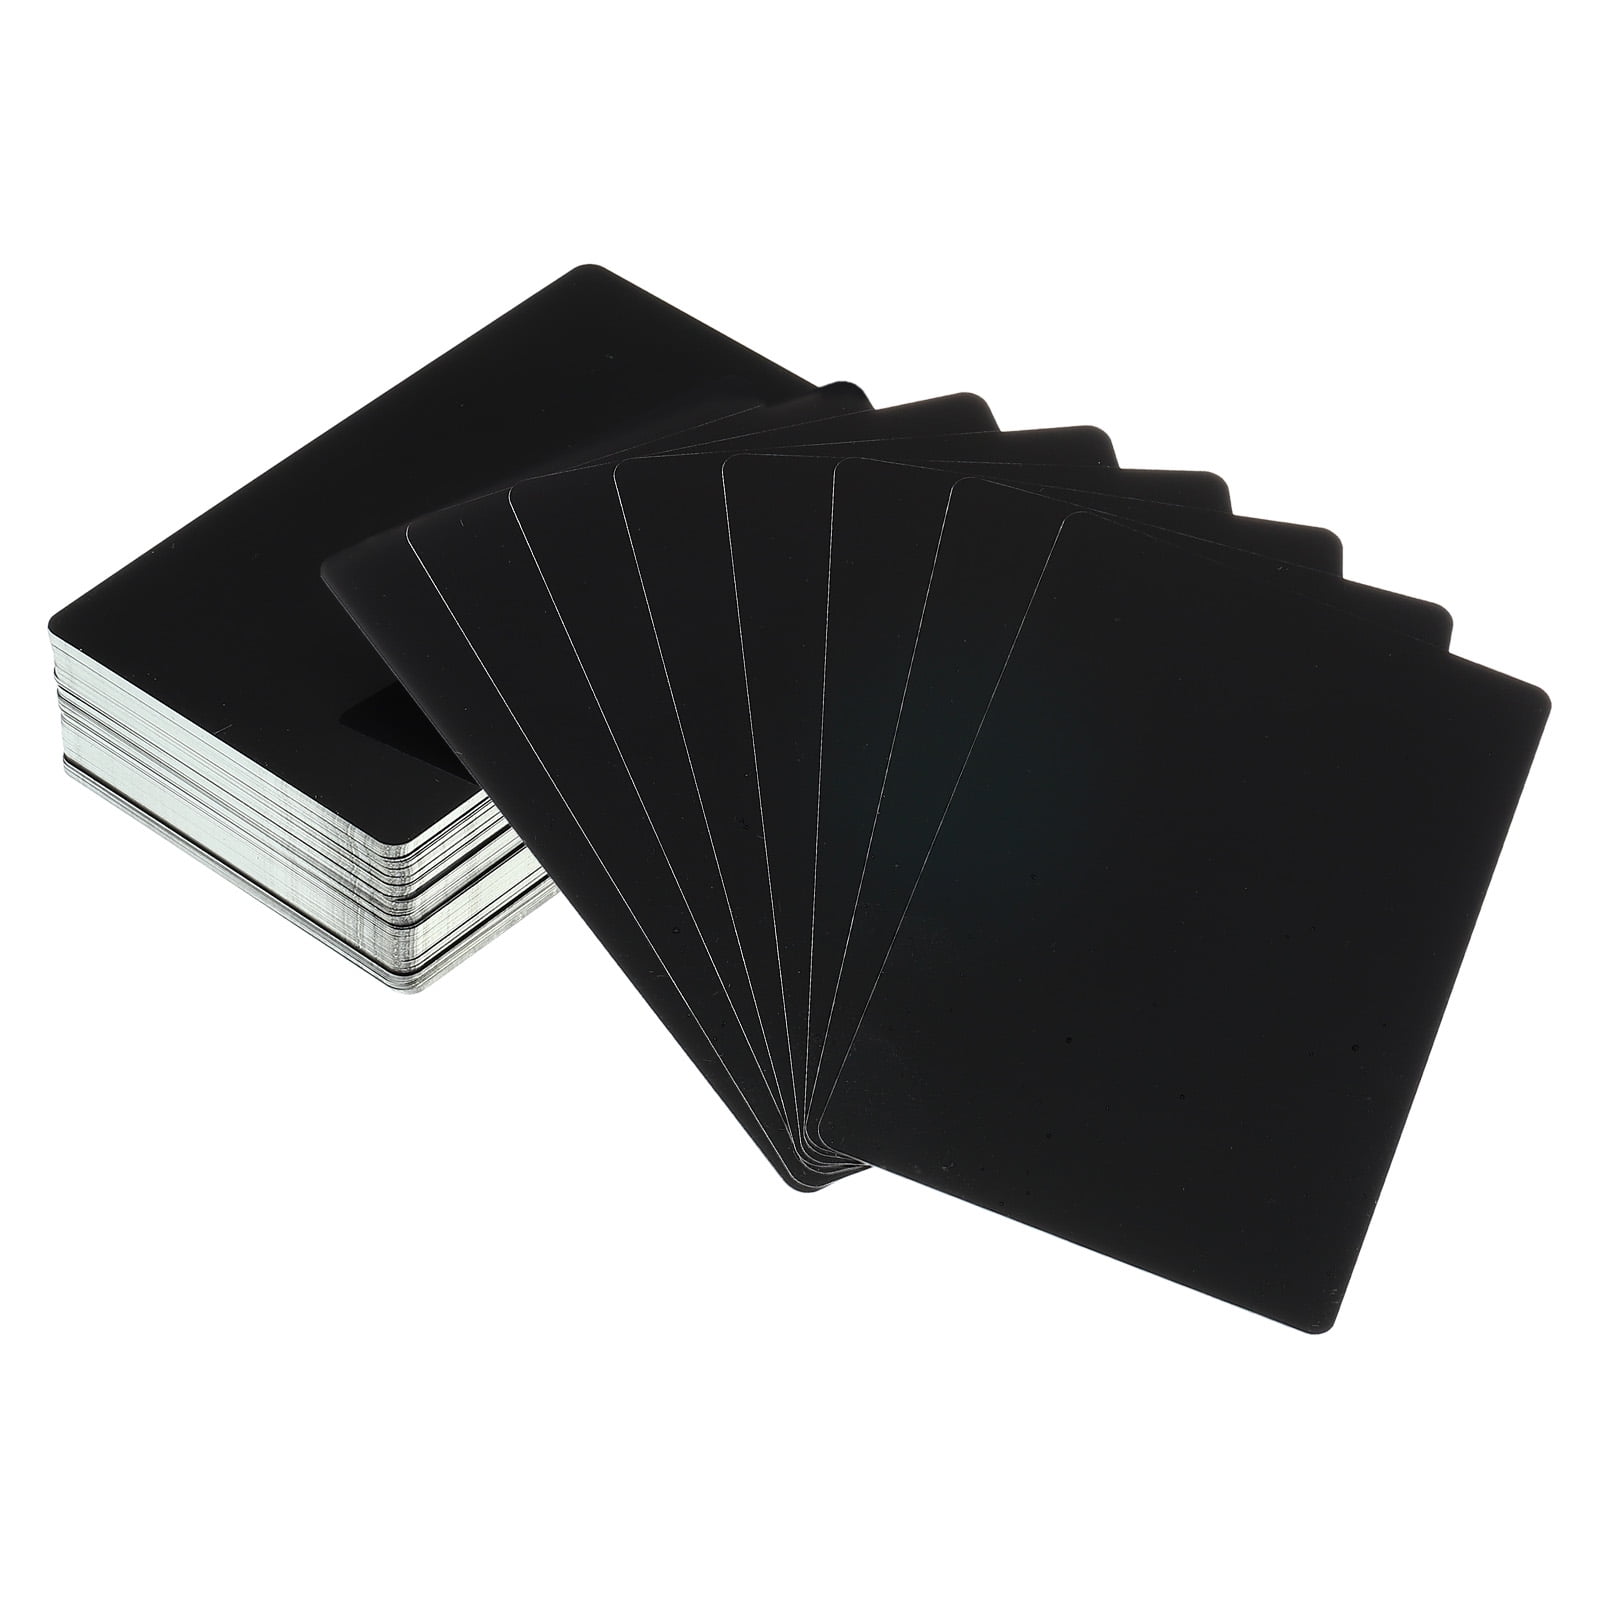 5x7 Laser Gloss Black to Silver Aluminum Blanks - Square Corners - Set of  10